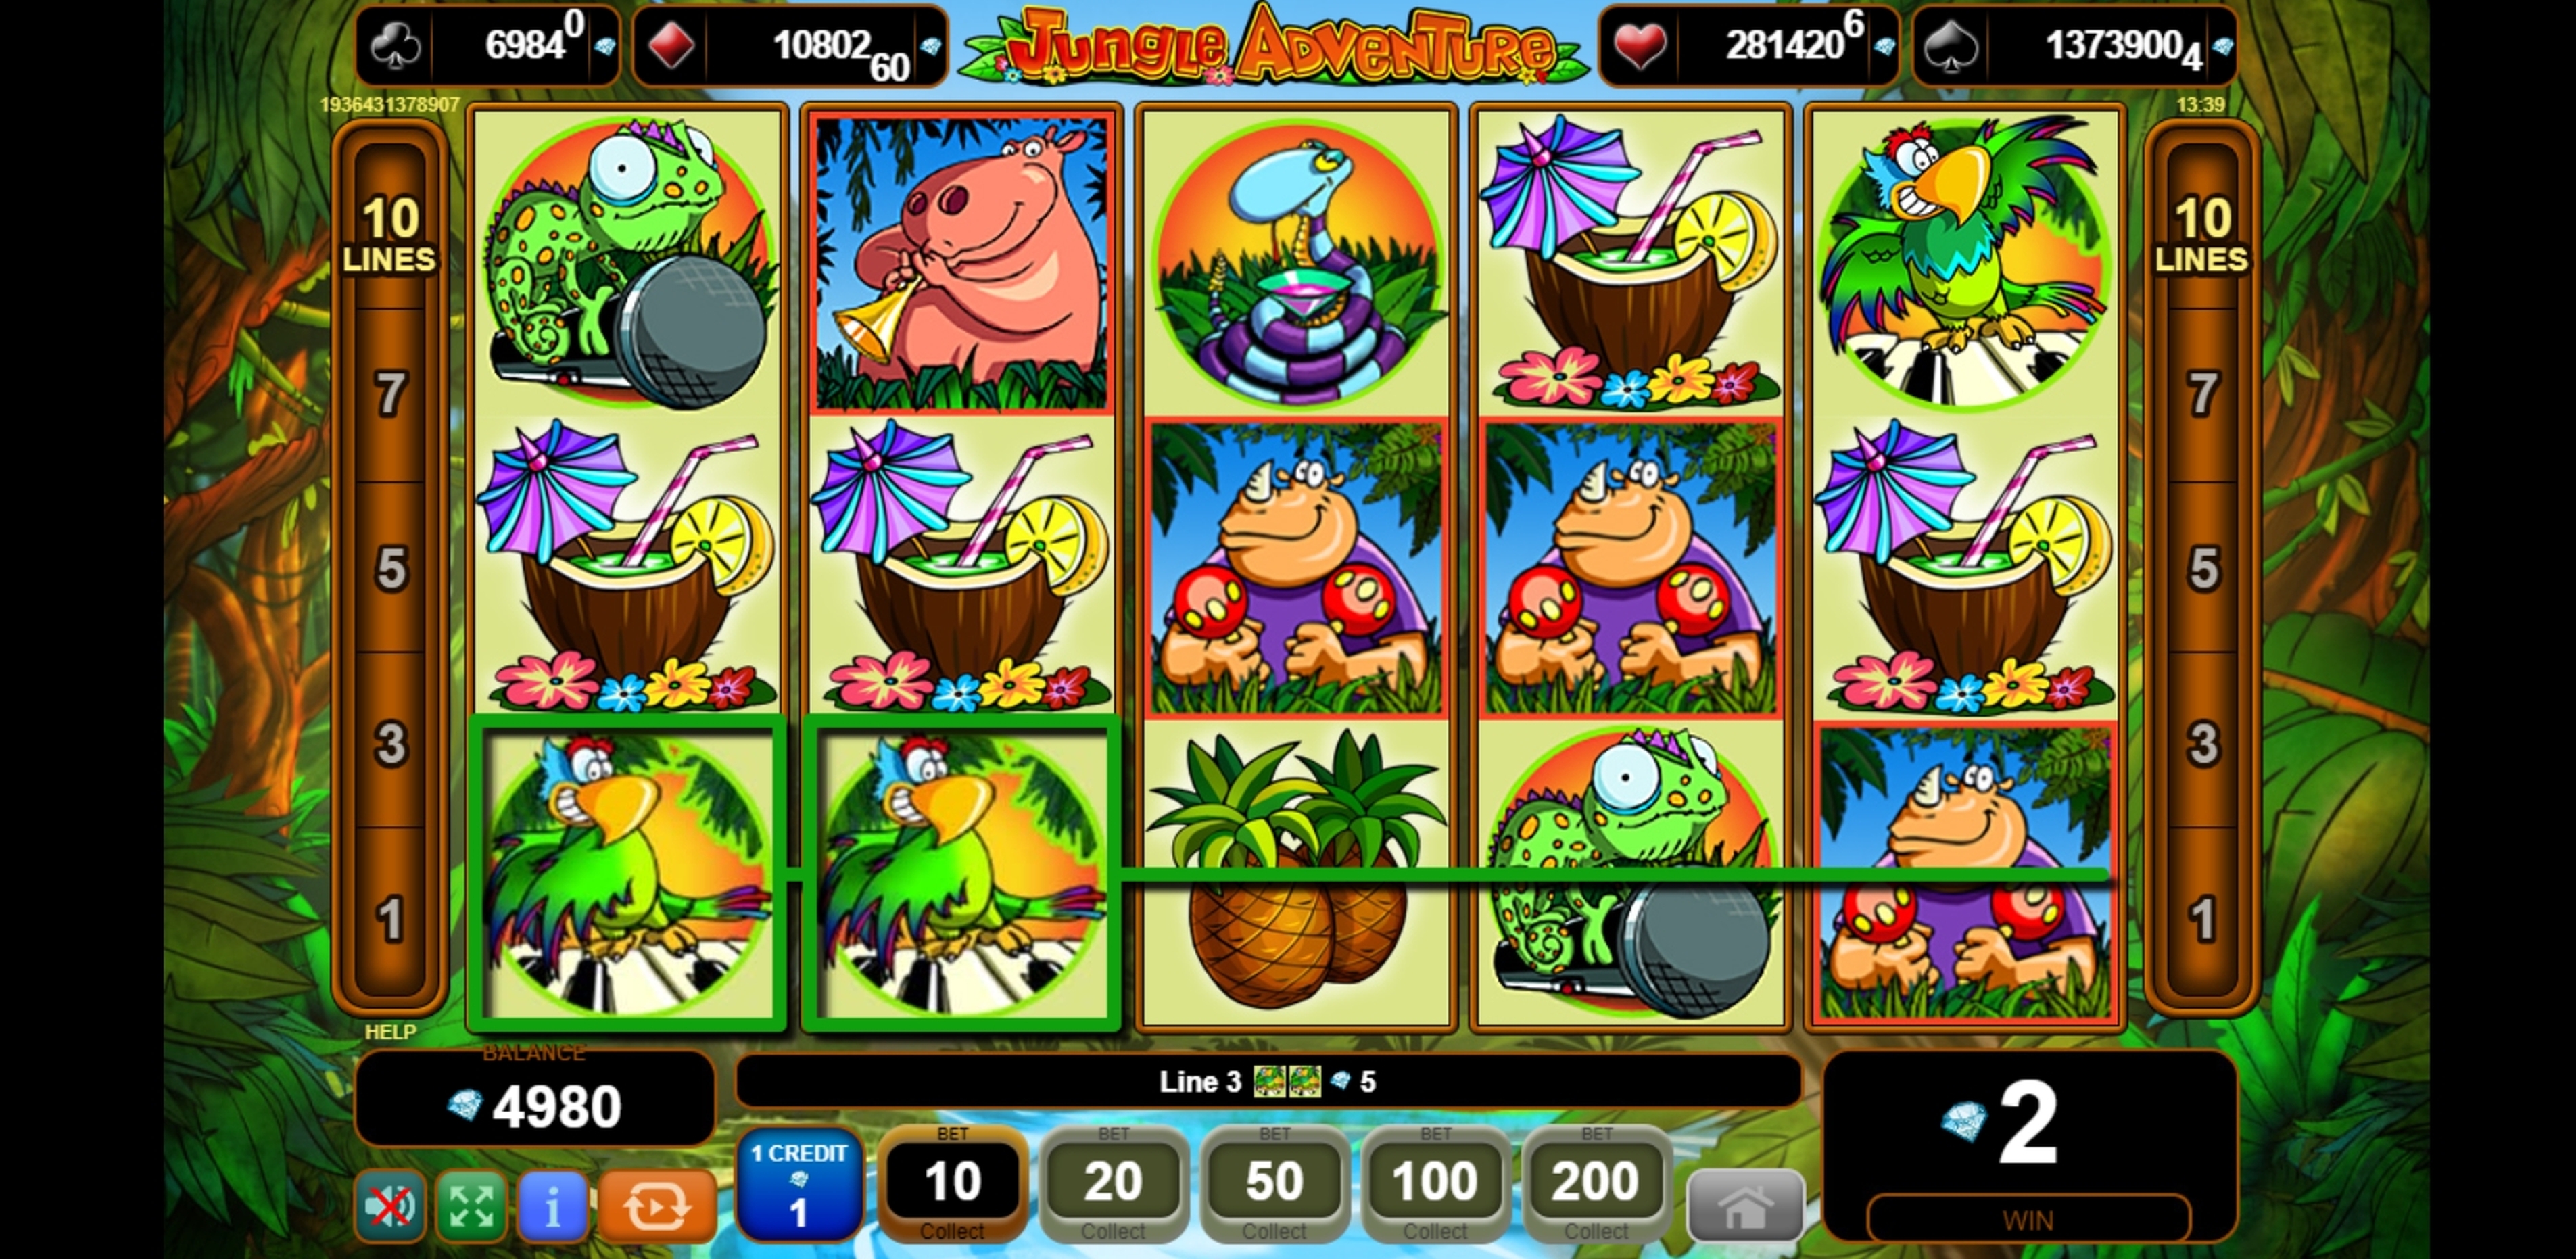 Win Money in Jungle Adventure Free Slot Game by EGT